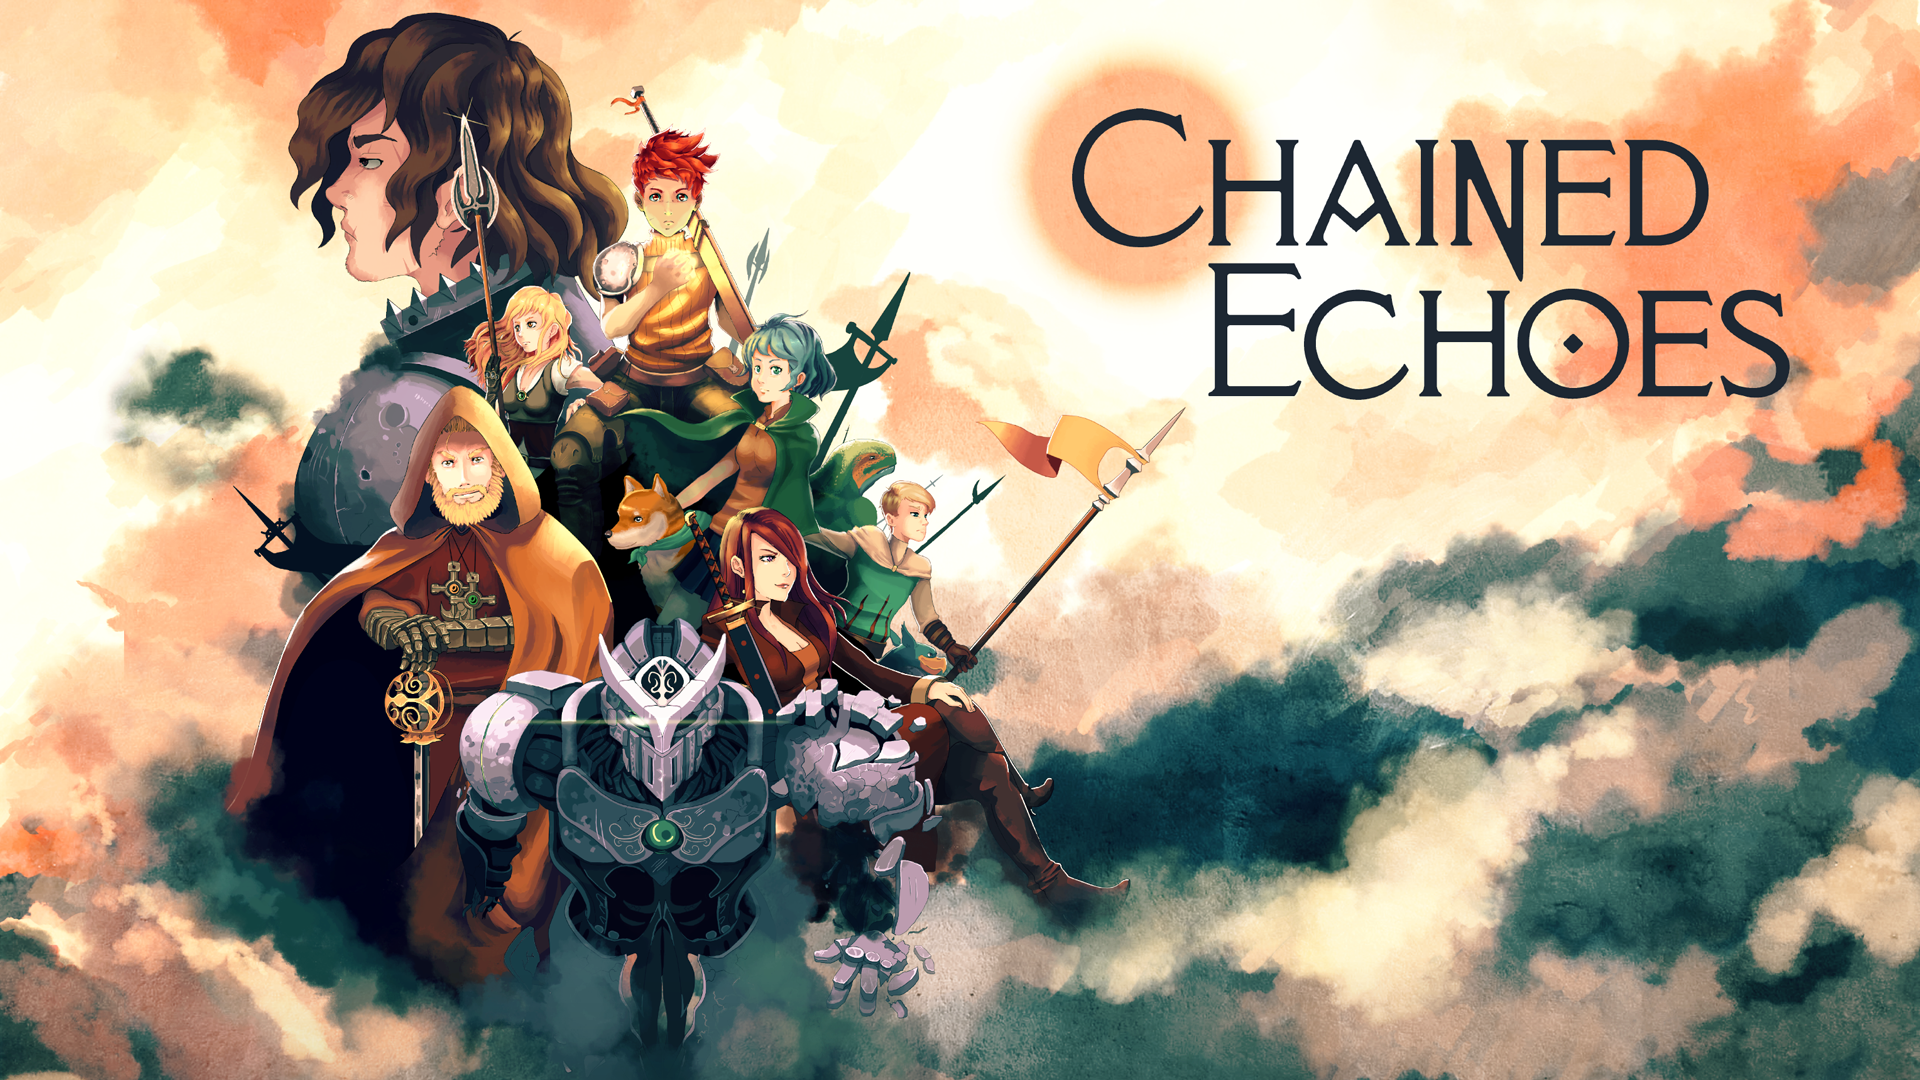 Chained Echoes screenshots, images and pictures - Giant Bomb